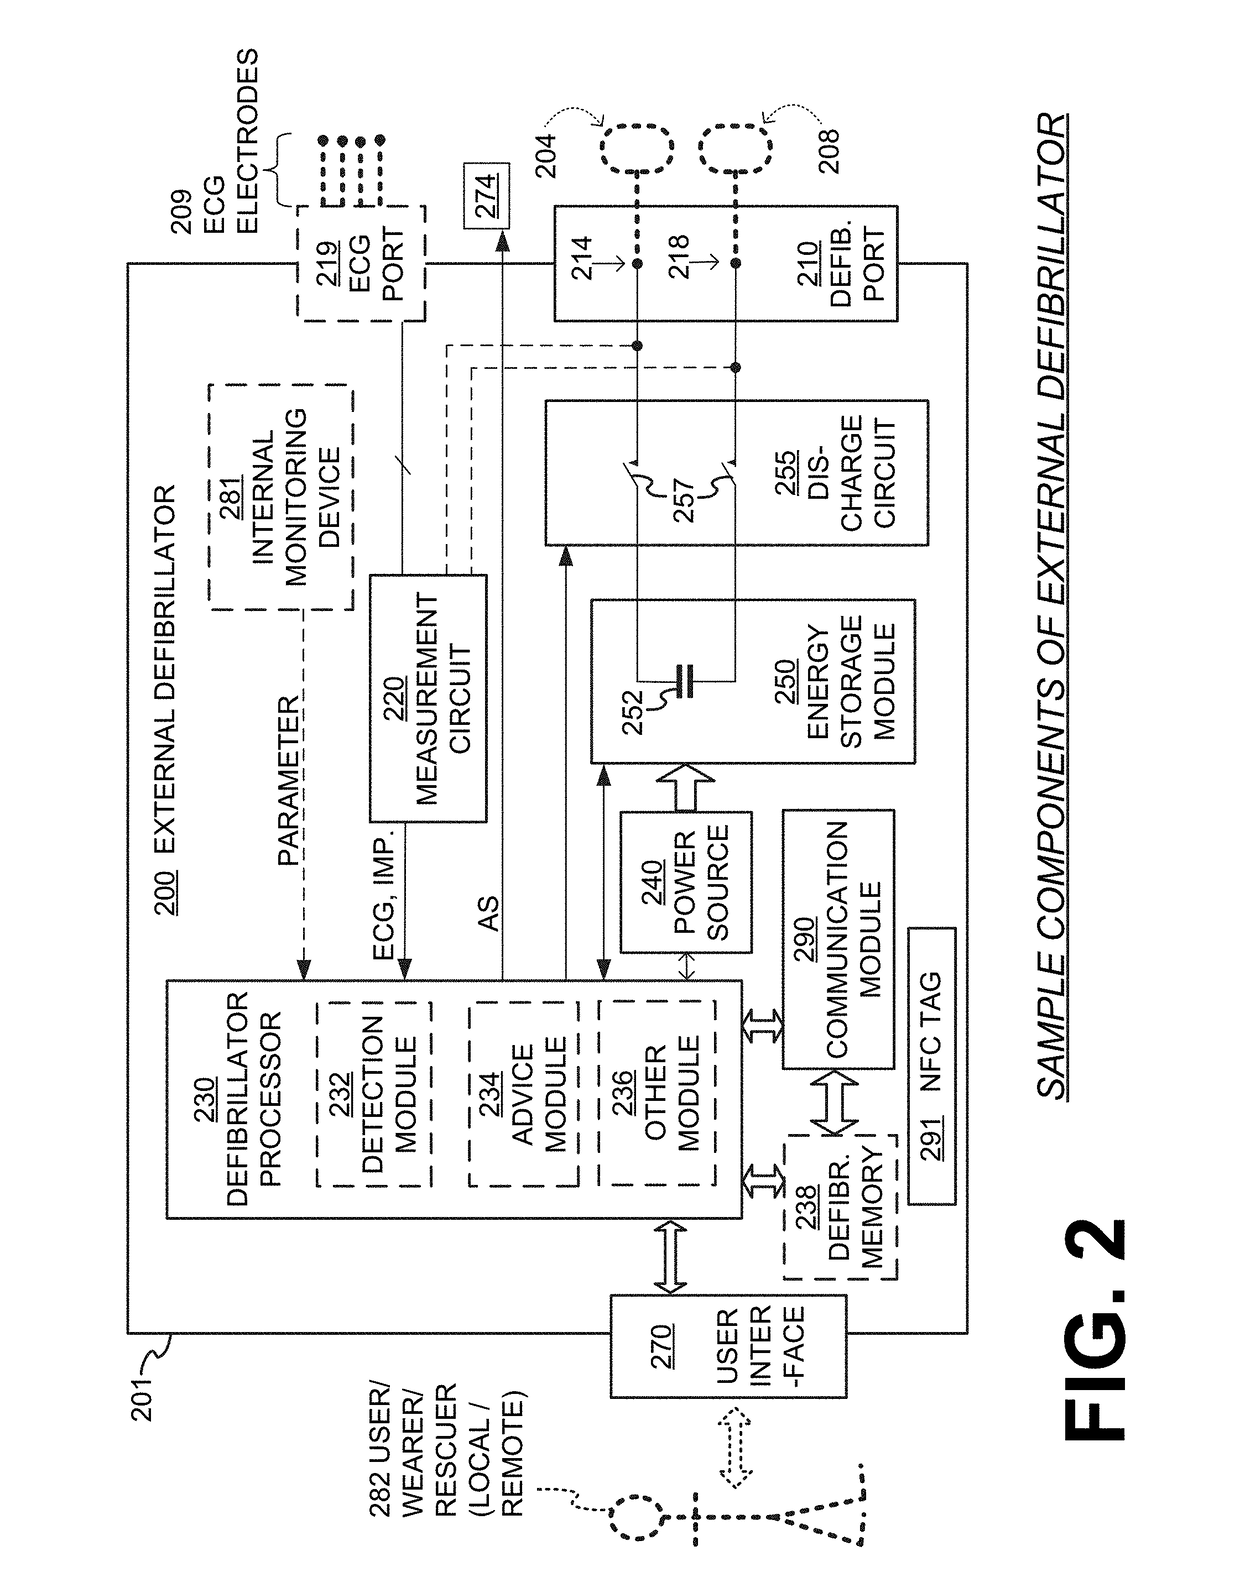 Wearable cardioverter defibrillator (WCD) system using security NFC tag for uploading configuration data